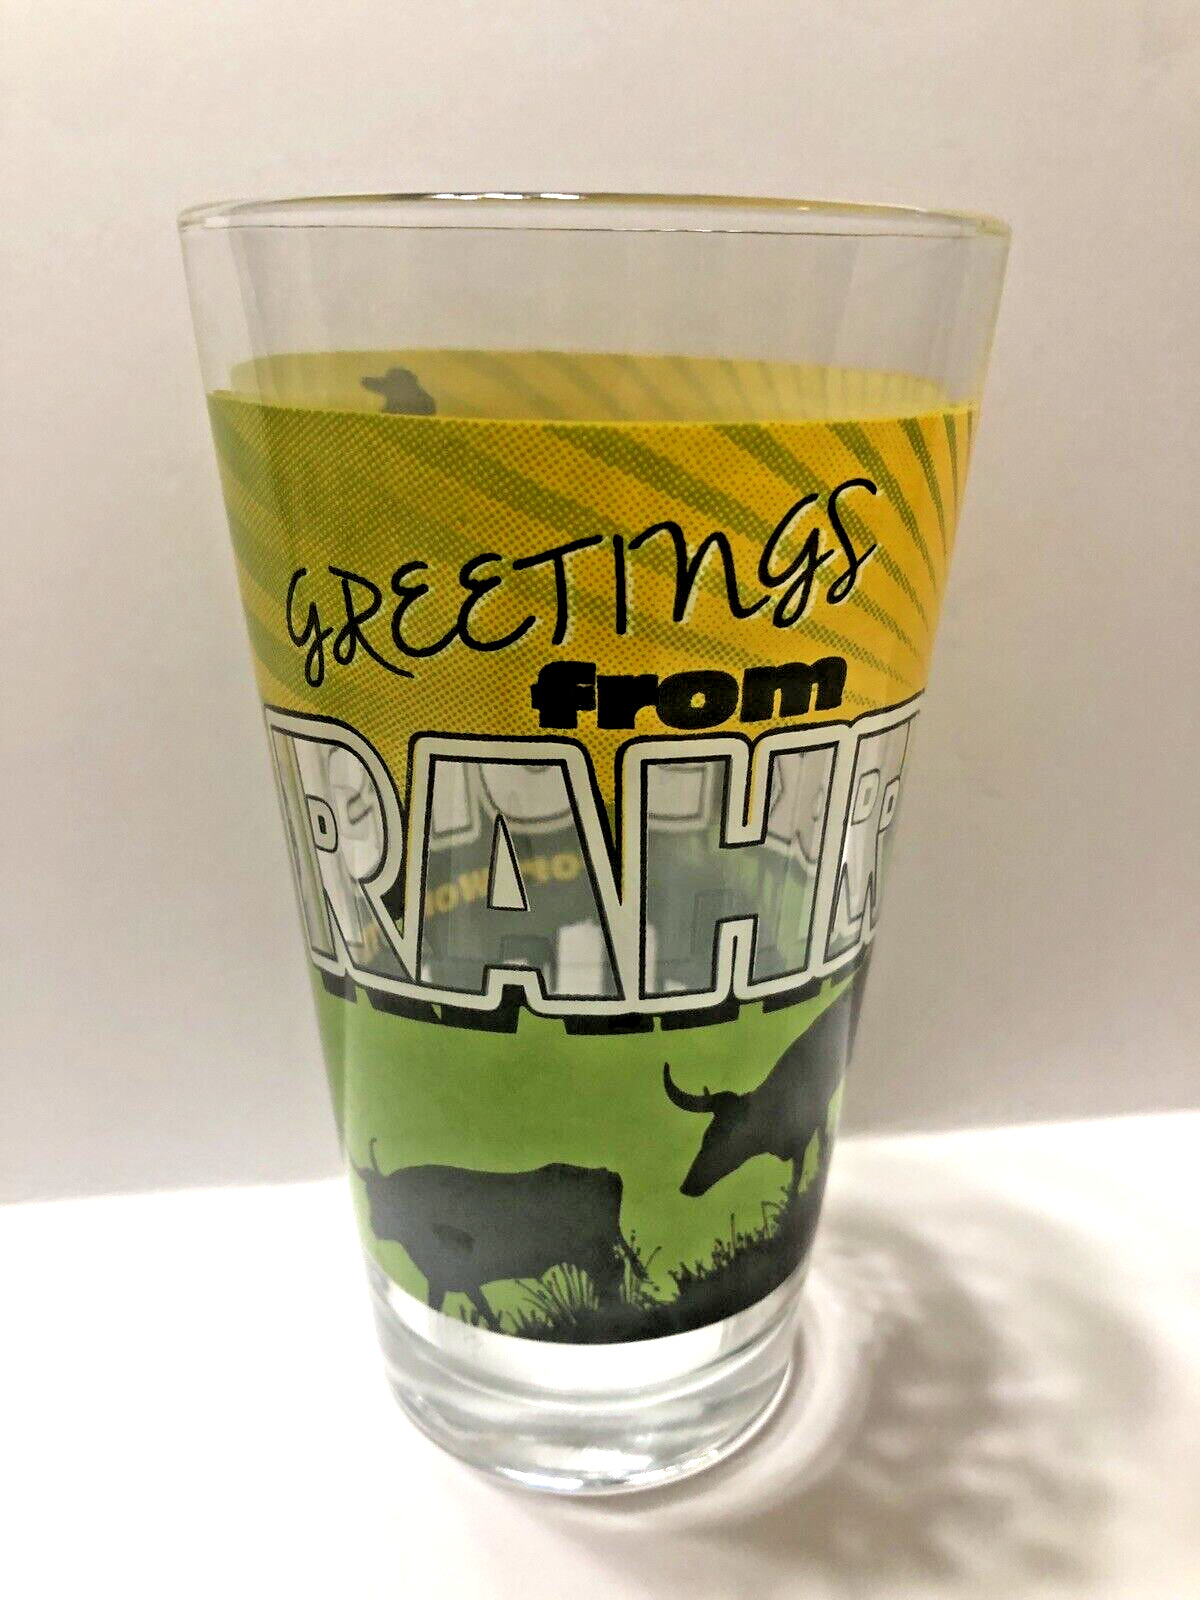 RAHR & SONS BREWERY ~ GREETINGS FROM FORT WORTH TEXAS ~ PINT BEER GLASS - RARE